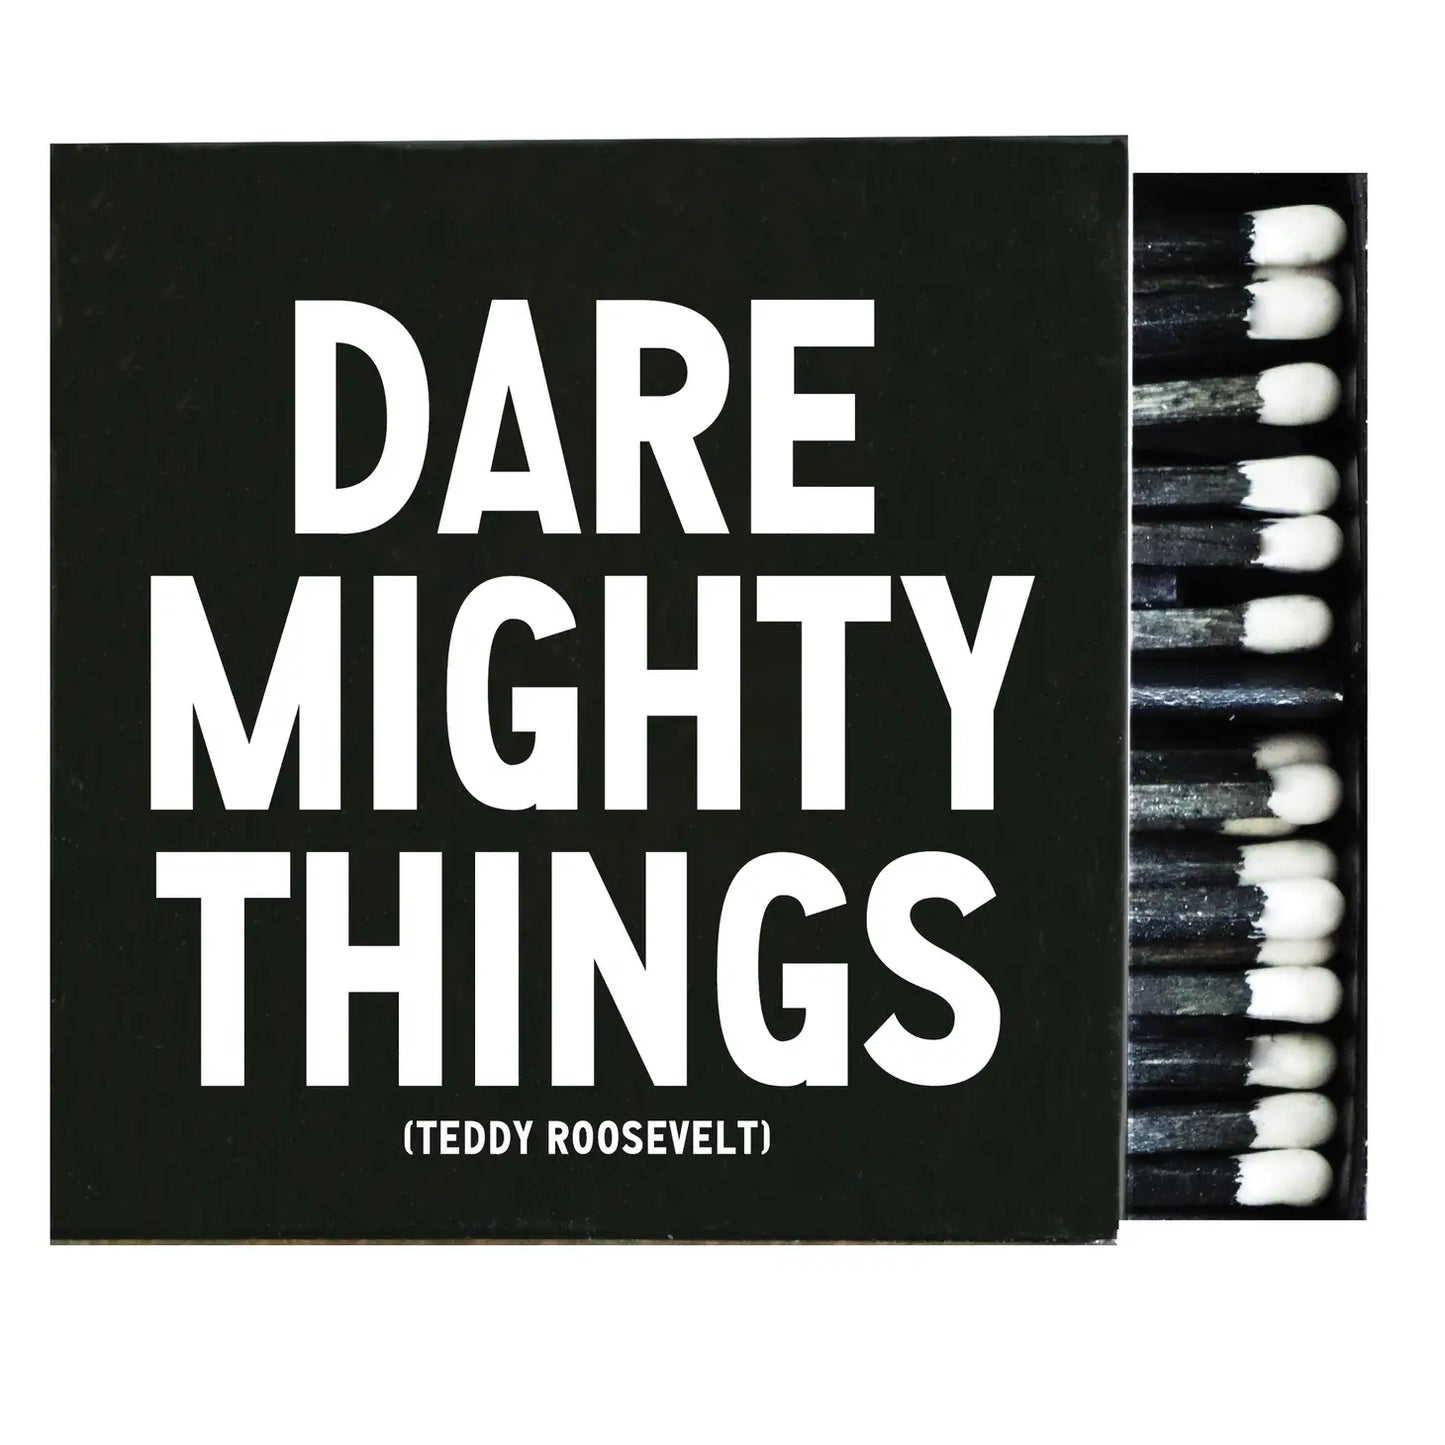 Matchboxes - Dare Mighty Things